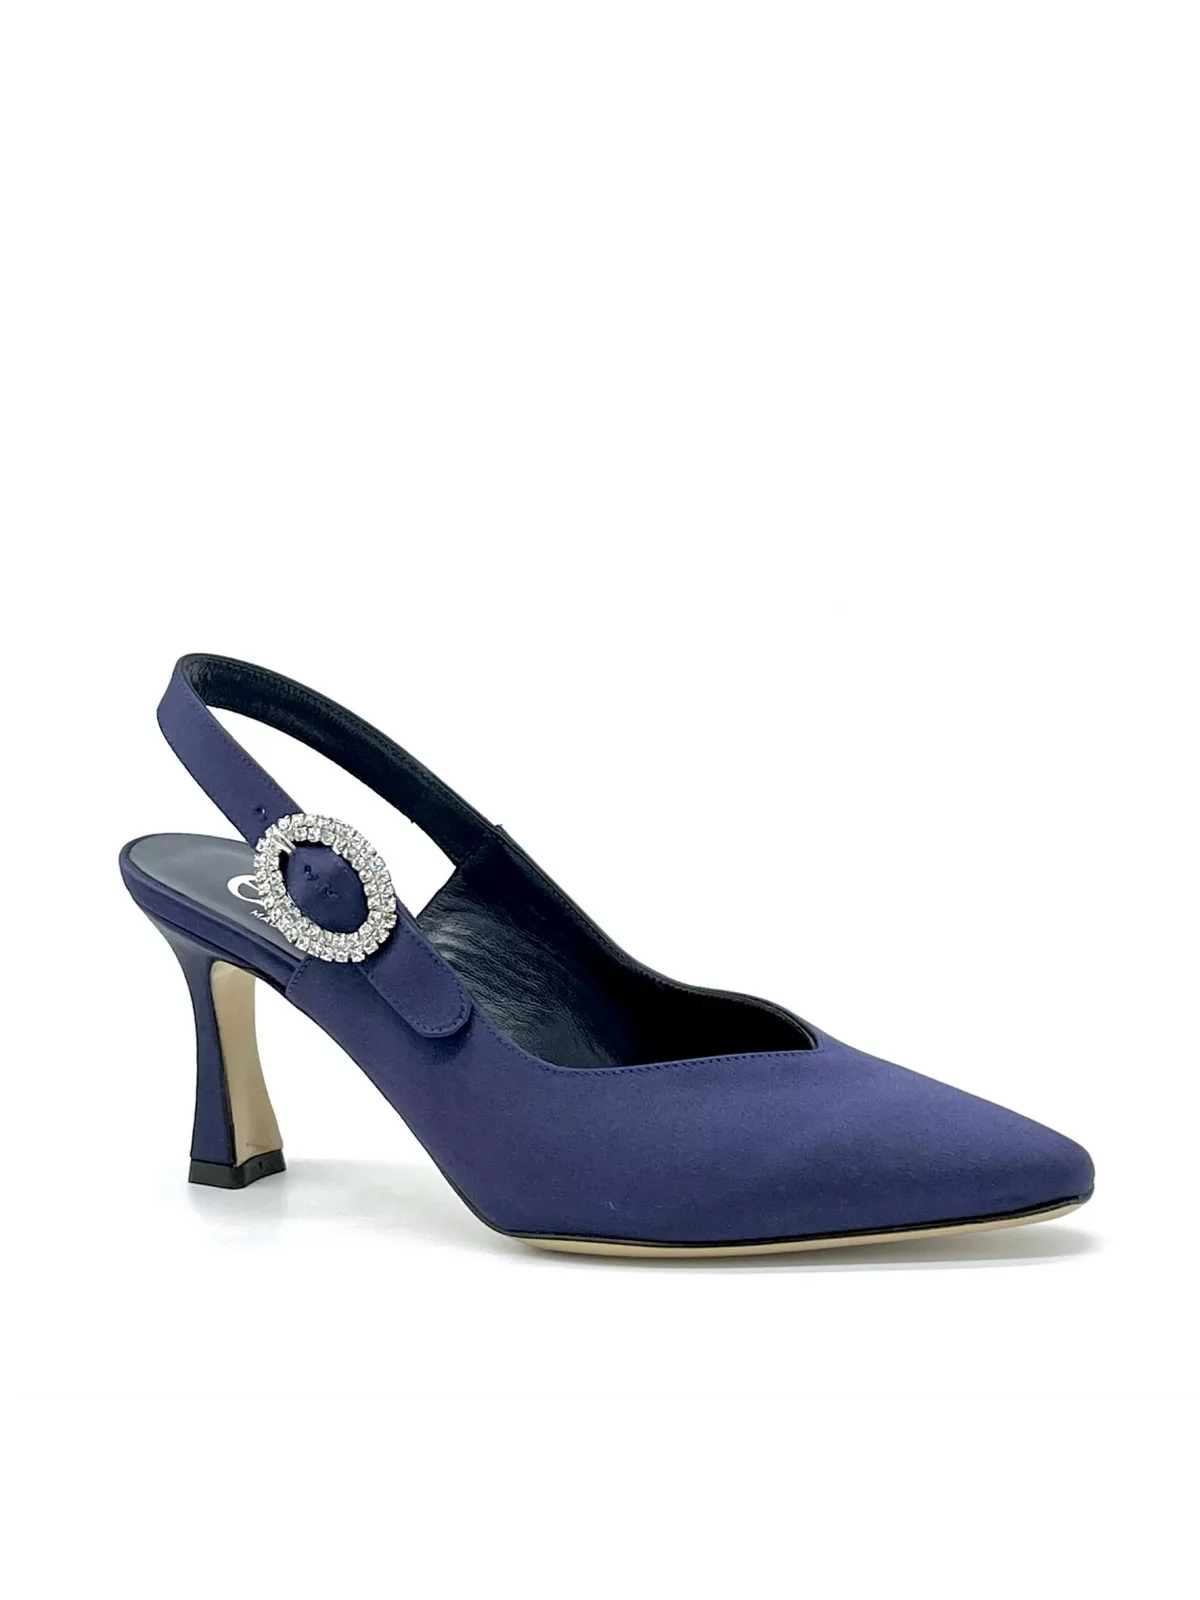 Blue silk slingback with jewel buckle. Leather lining, leather sole. 7,5 cm heel